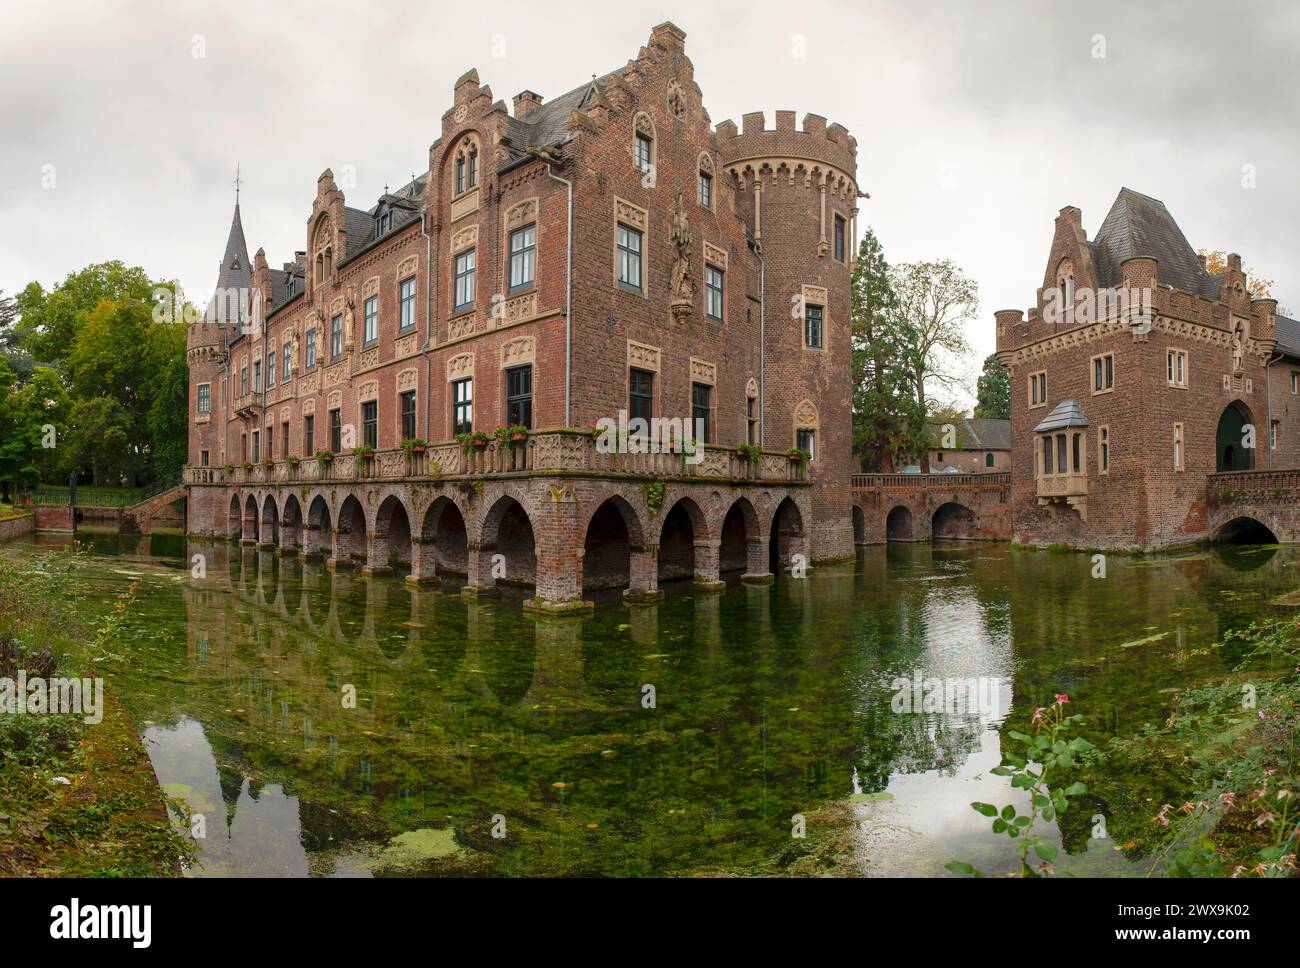 Visiting Paffendorf castle in North Rhine-Westphalia, Germany on a rainy day Stock Photo